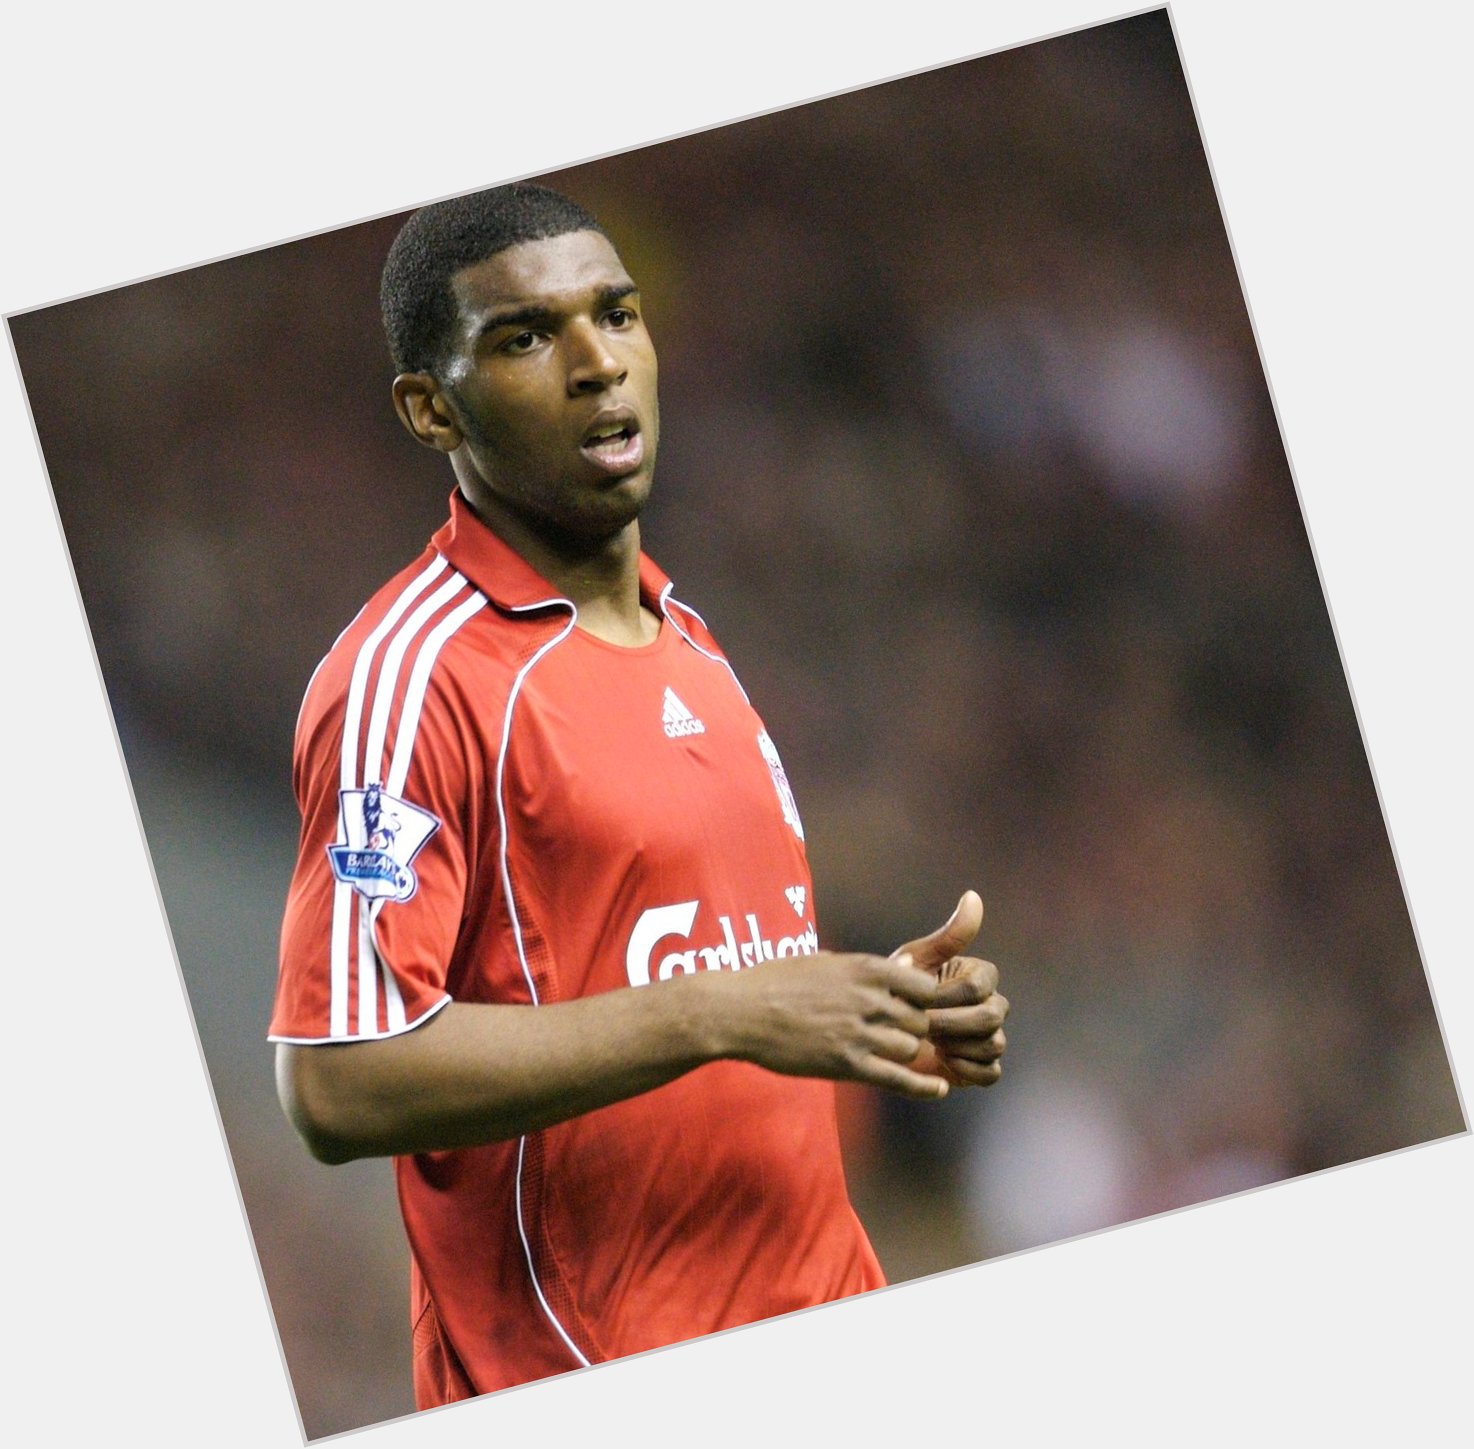   Happy birthday to former forward who celebrates his 28th today. 

Fuck Ryan Babel